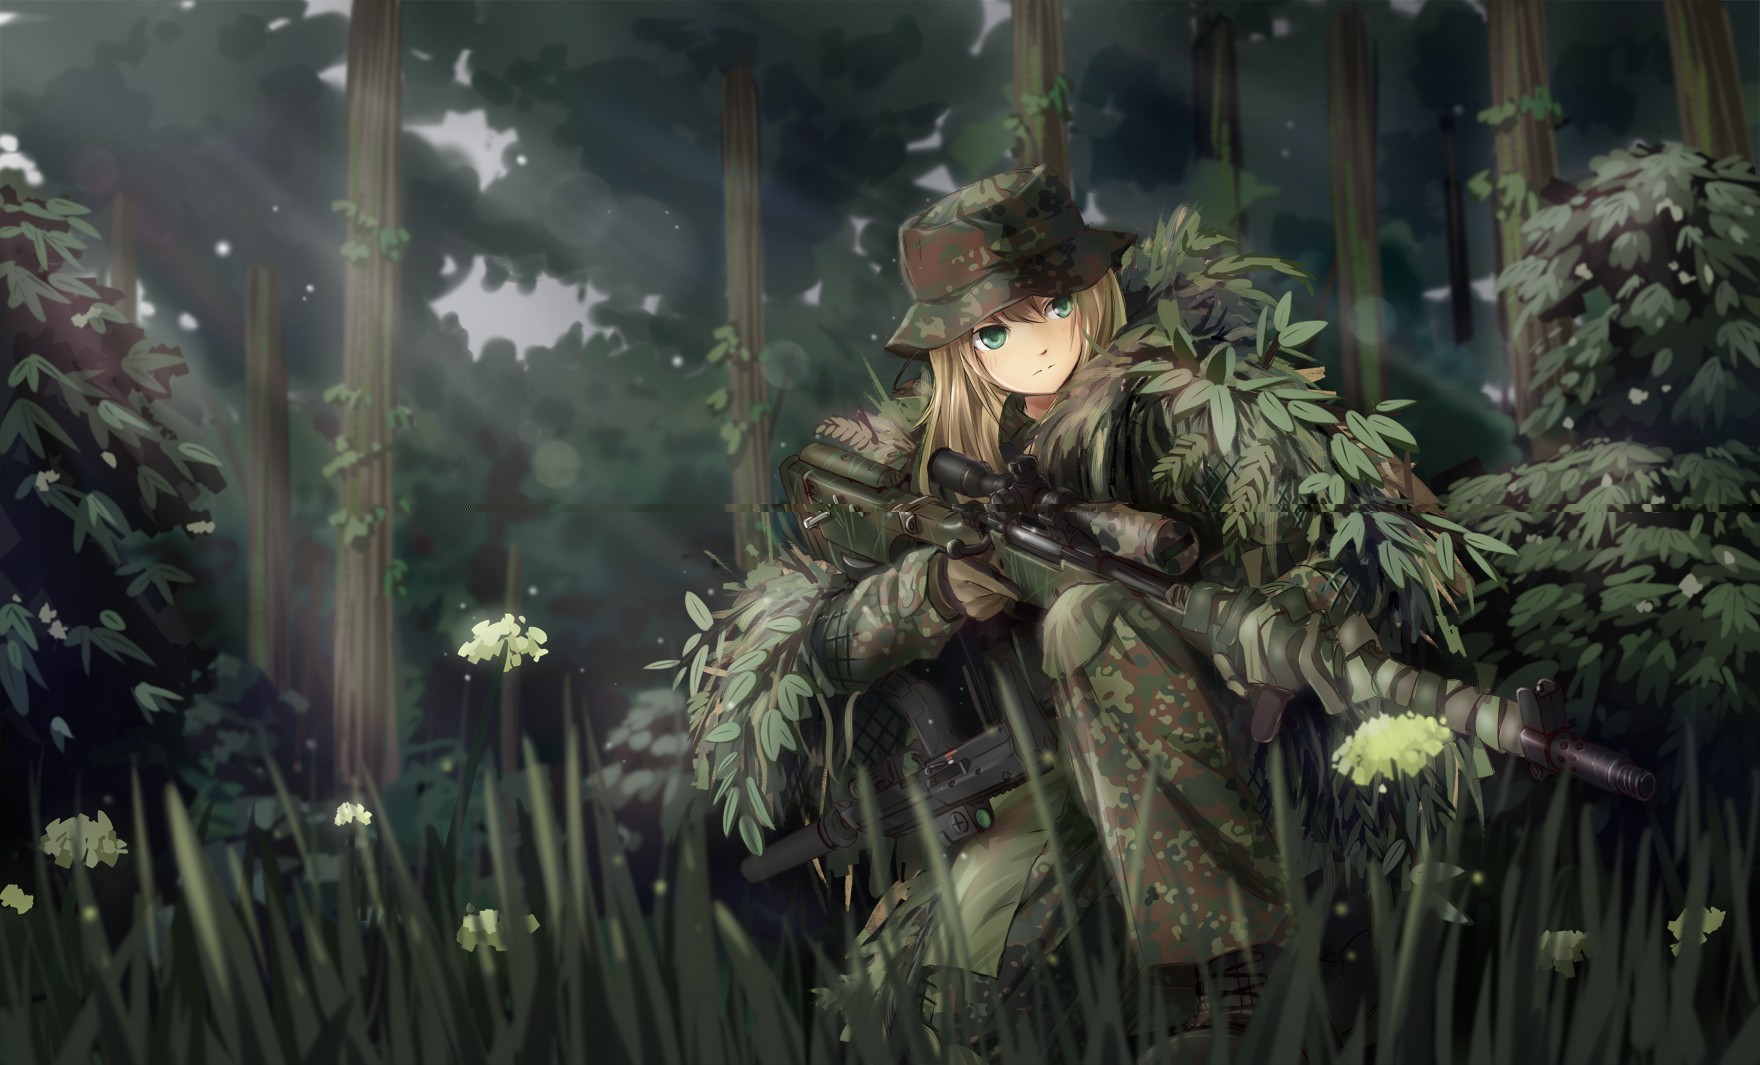 anime, Anime Girls, Original Characters, Military, Weapon, Camouflage, Ghillie Suit, Sniper Rifle, MP7, Forest, Soldier, Gun, TC1995, Fantasy Art, Manga Wallpaper